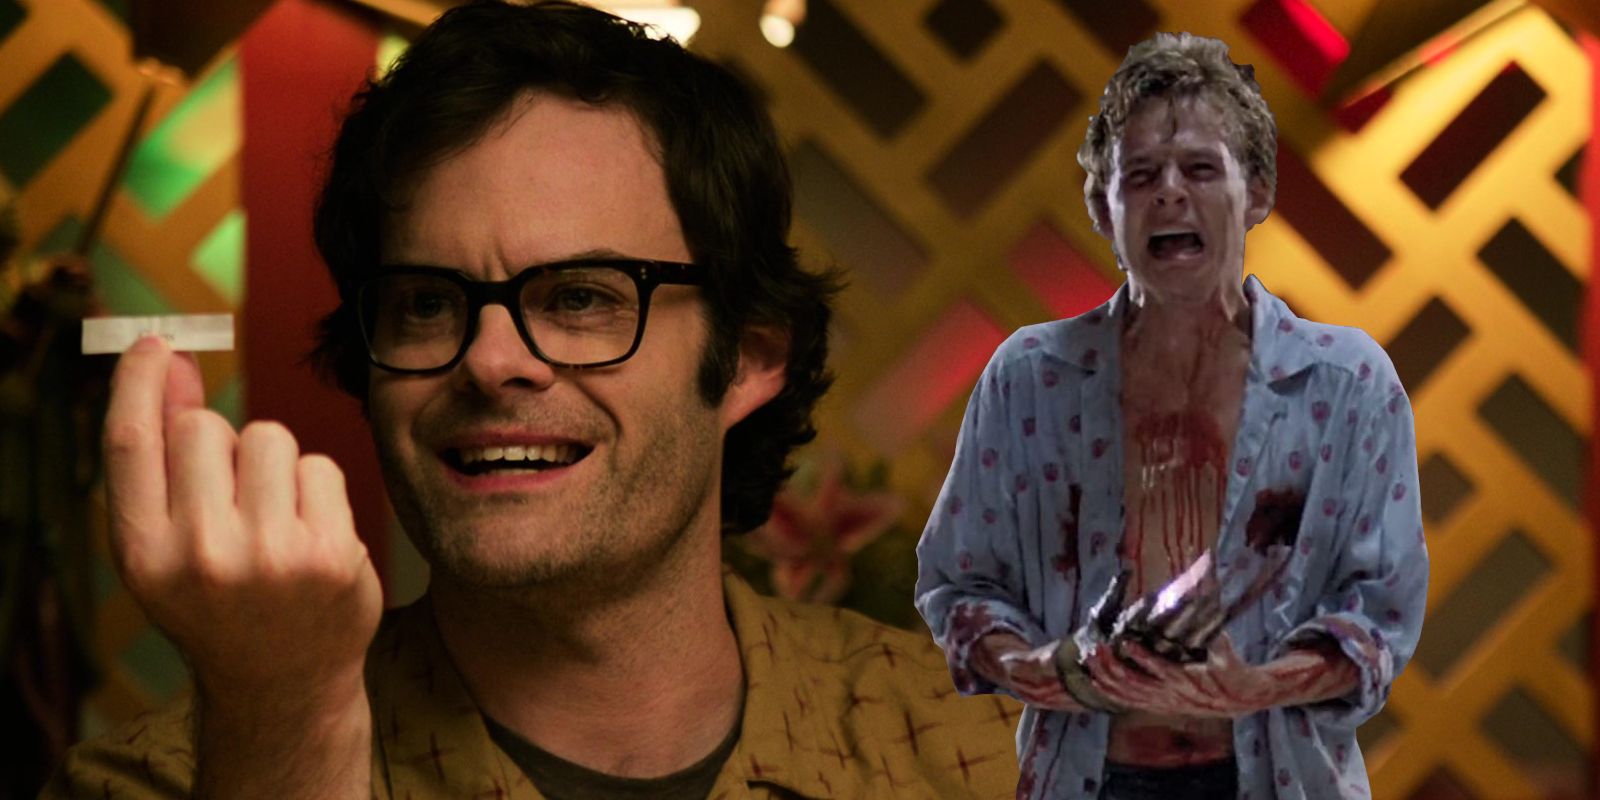 Bill Hader in It: Chapter Two with Mark Patton from A Nightmare On Elm Street 2 in the background.